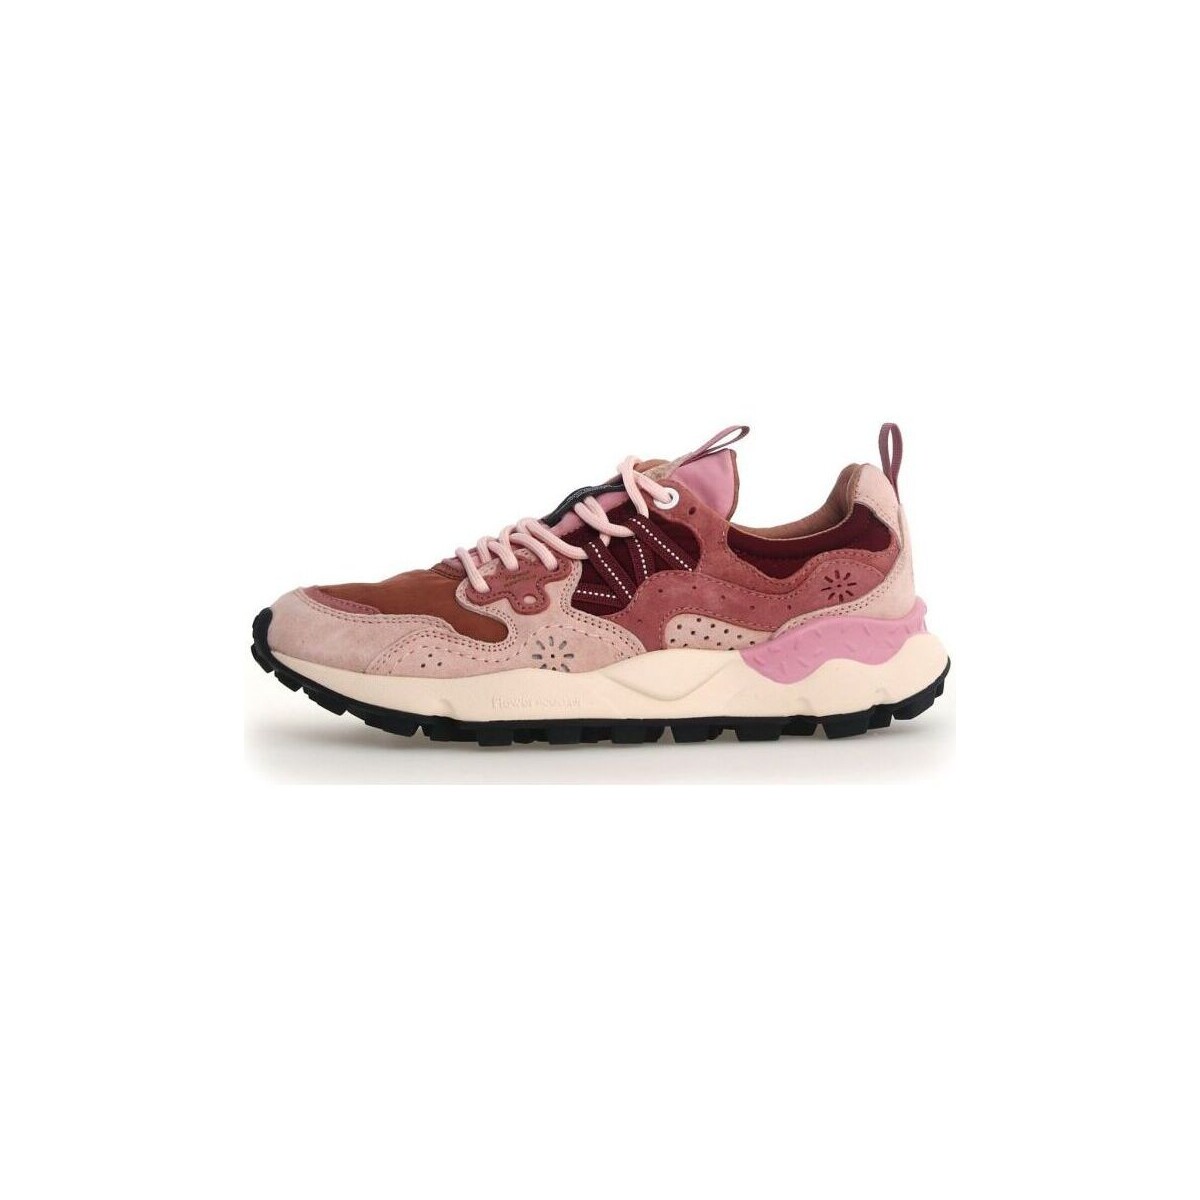 Chaussures Femme Baskets mode Flower Mountain YAMANO 3 - 2017817 01-2M85 CIPRIA/CUOIO/BROWN Rose